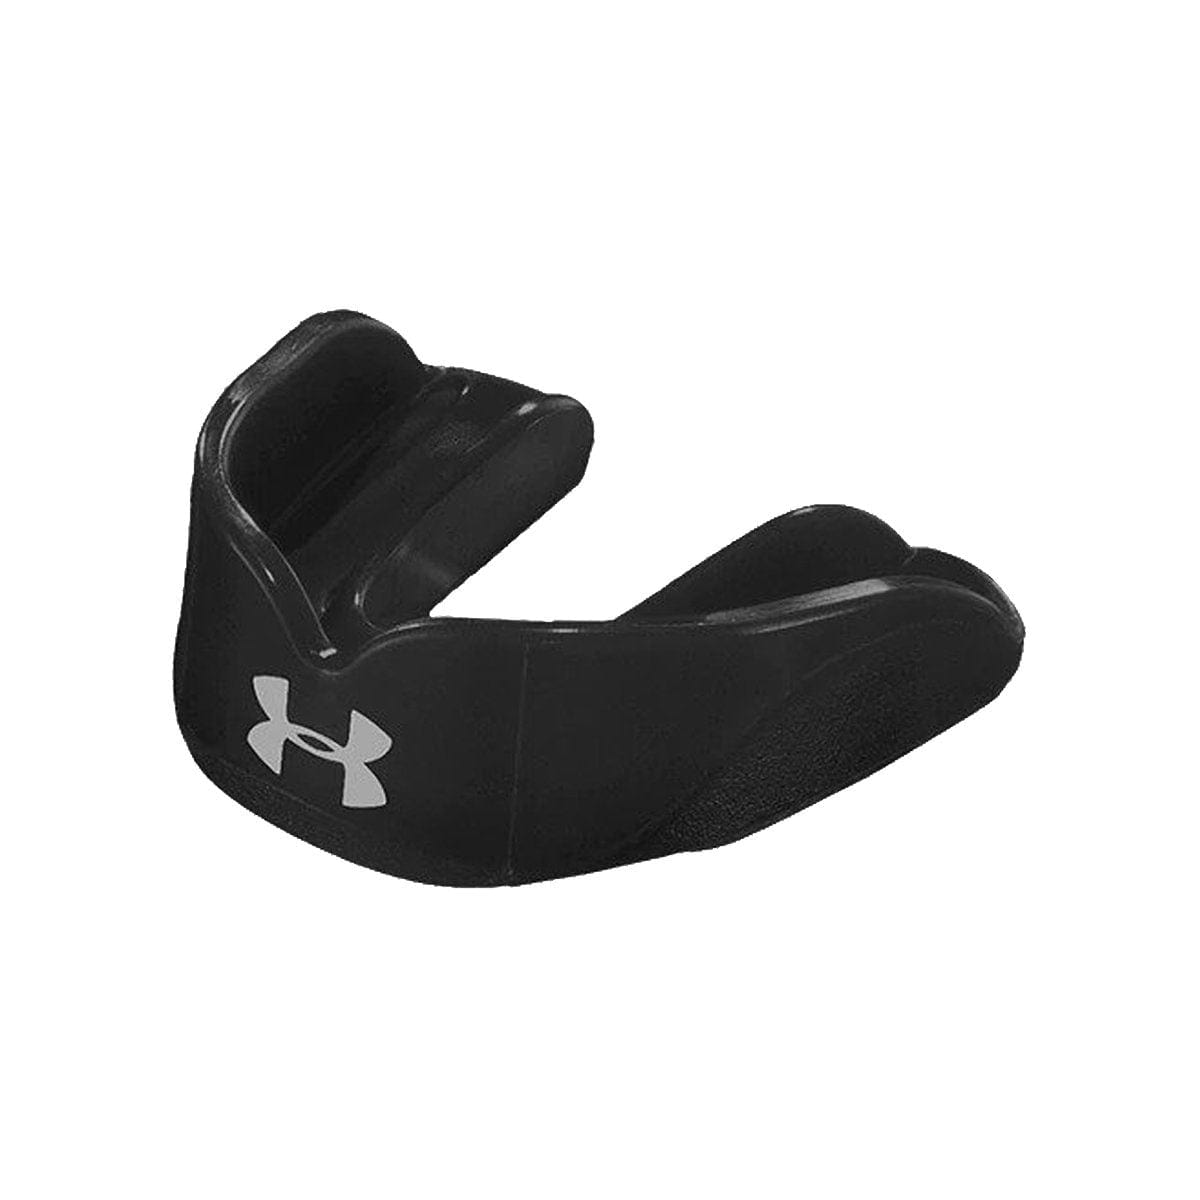 Under Armour Mouth Guard